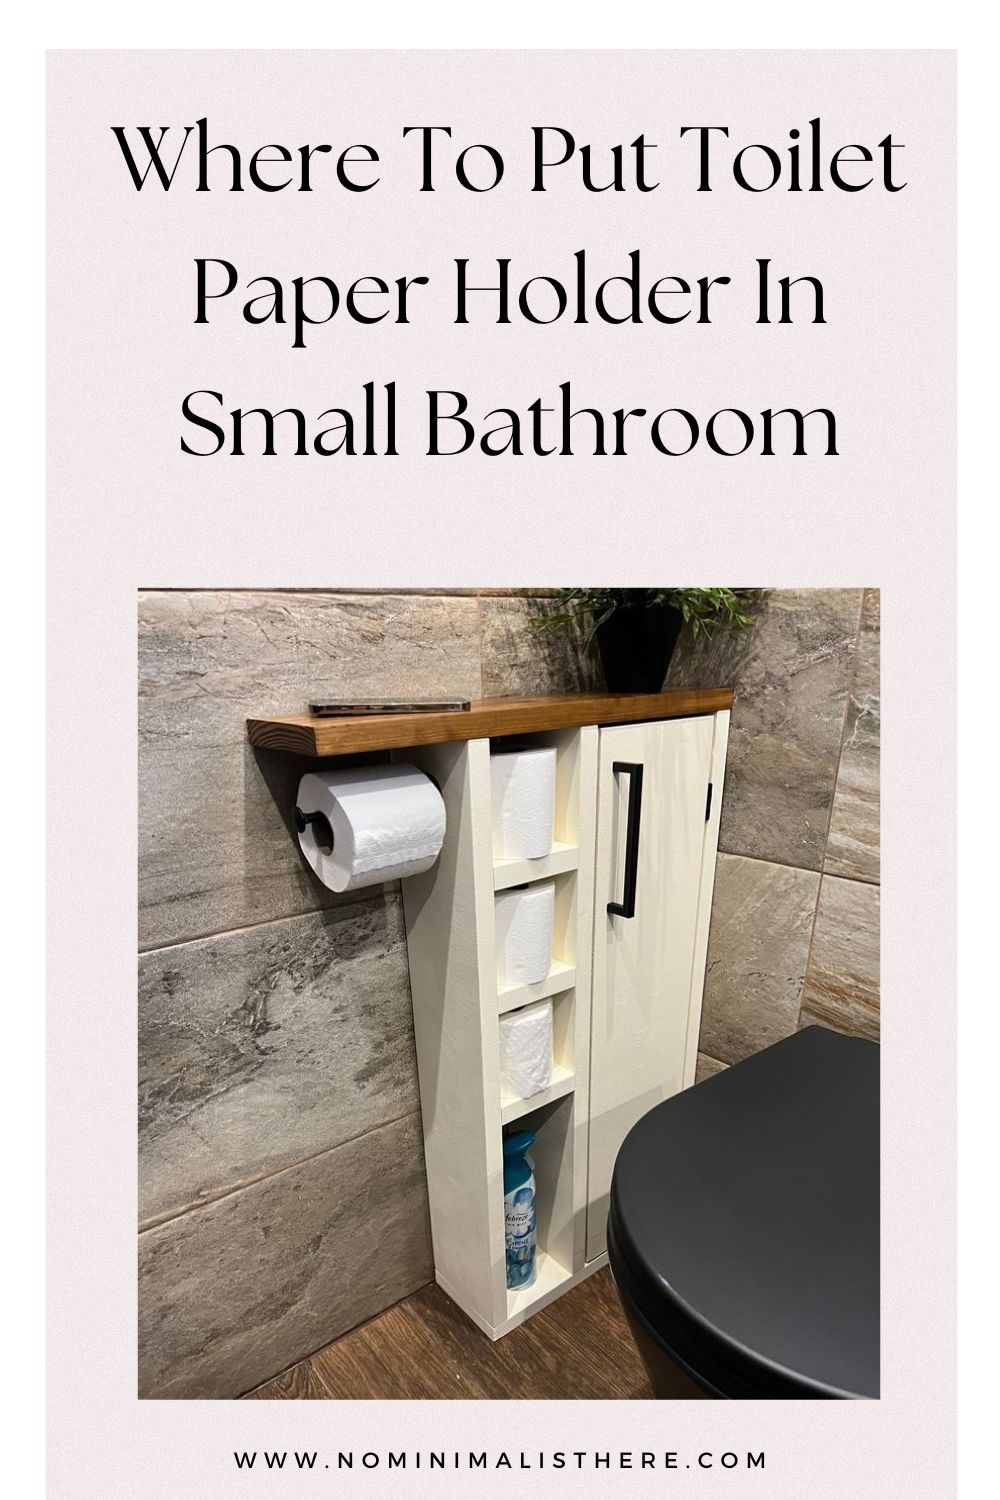 pinterest image for an article about   Where To Put Toilet Paper Holder In Small Bathroom